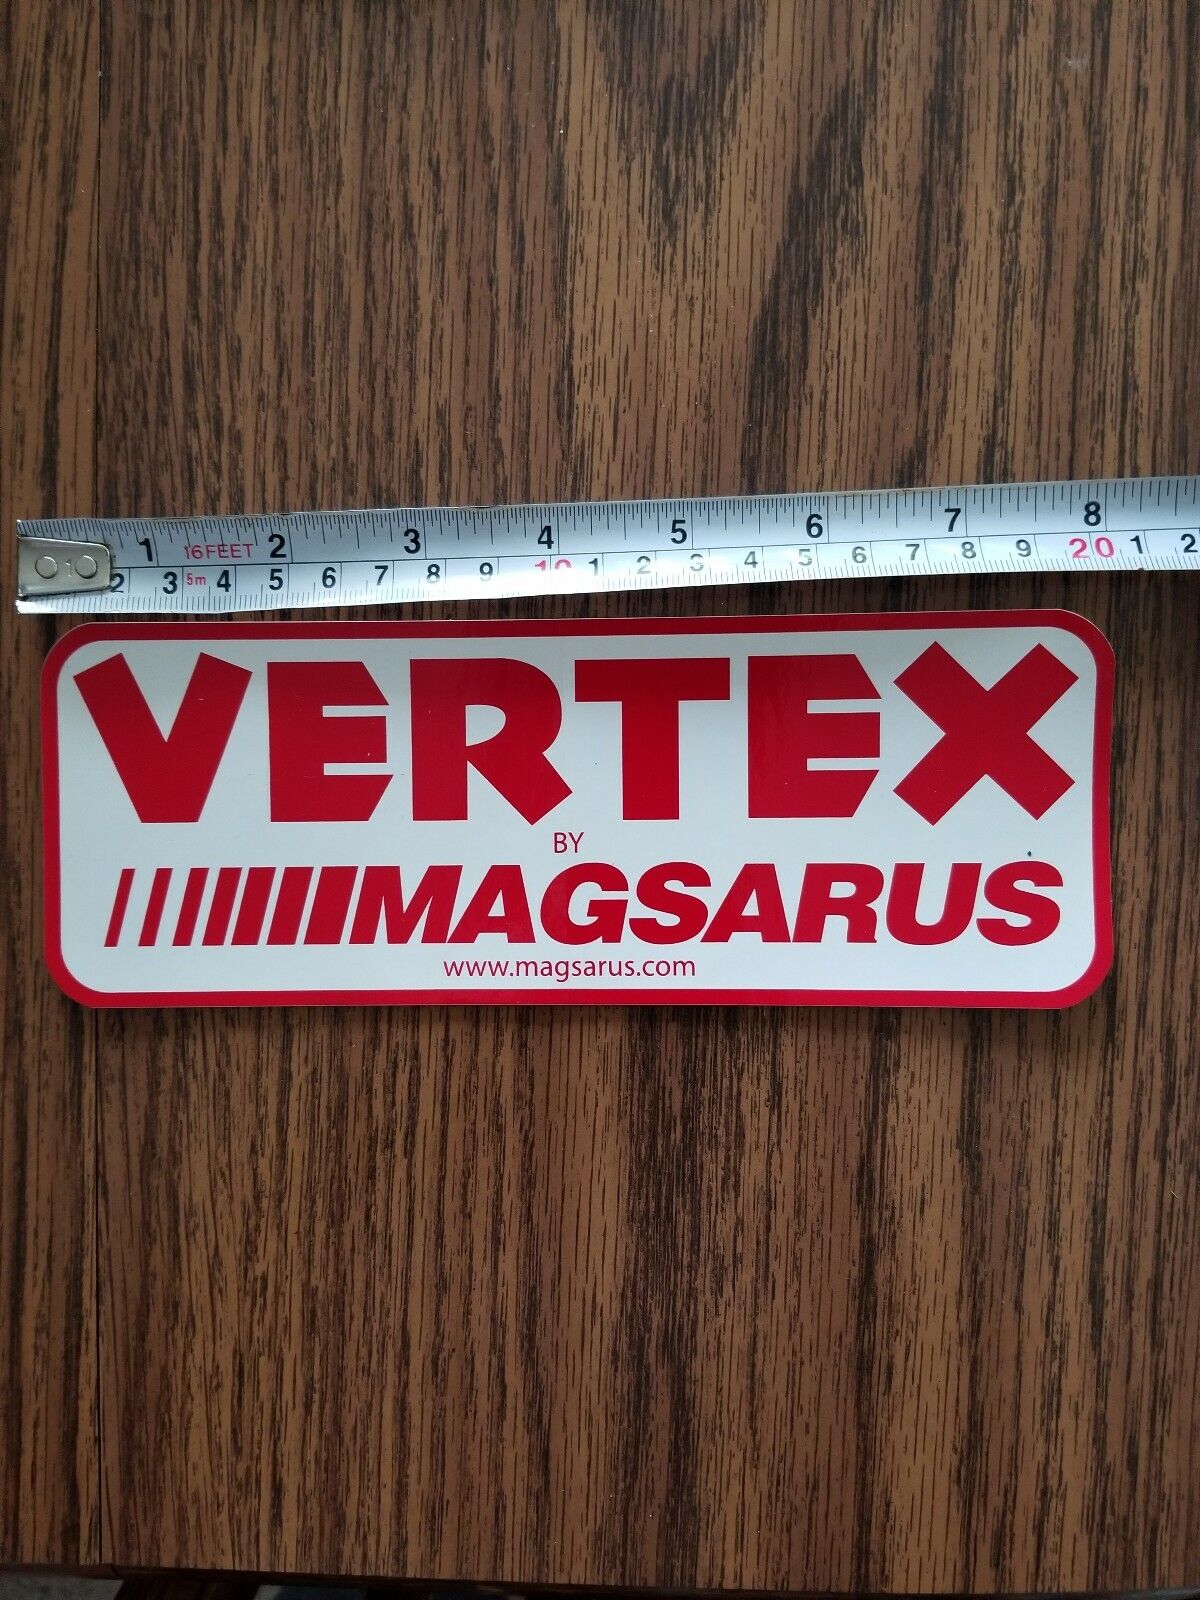 VERTEX BY MAGSARUS DECALS STICKER DRAG 4WD OFFROAD NASCAR RACING MAN CAVE HOT